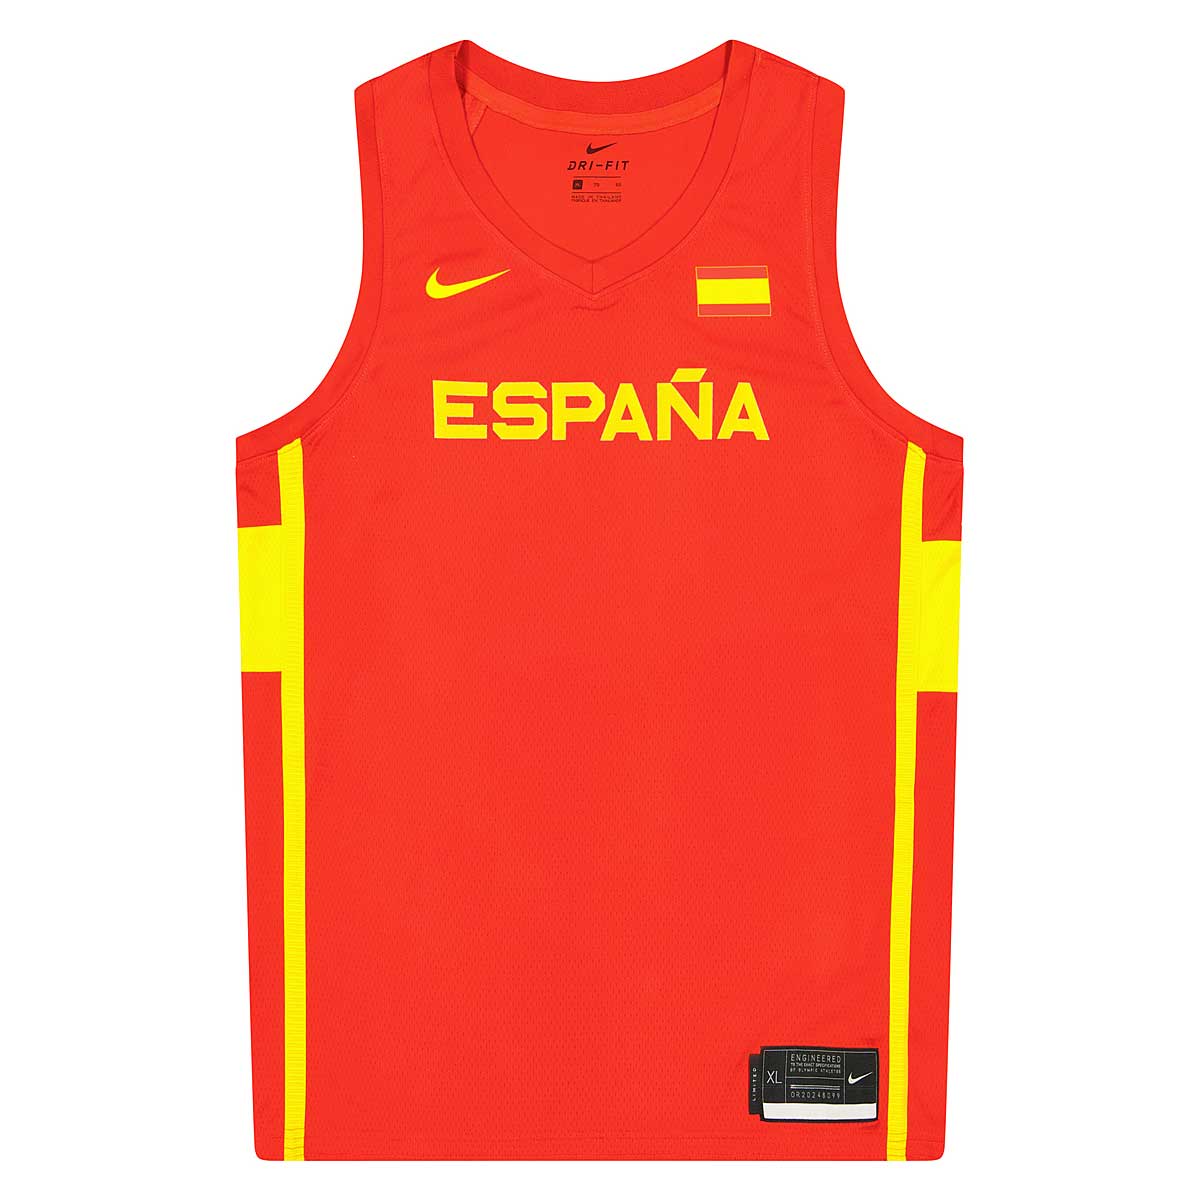 Image of Nike Spain Basketball Road Jersey, Challenge Red/Midwest Gold, Male, Basketball Jerseys, CQ0091-600